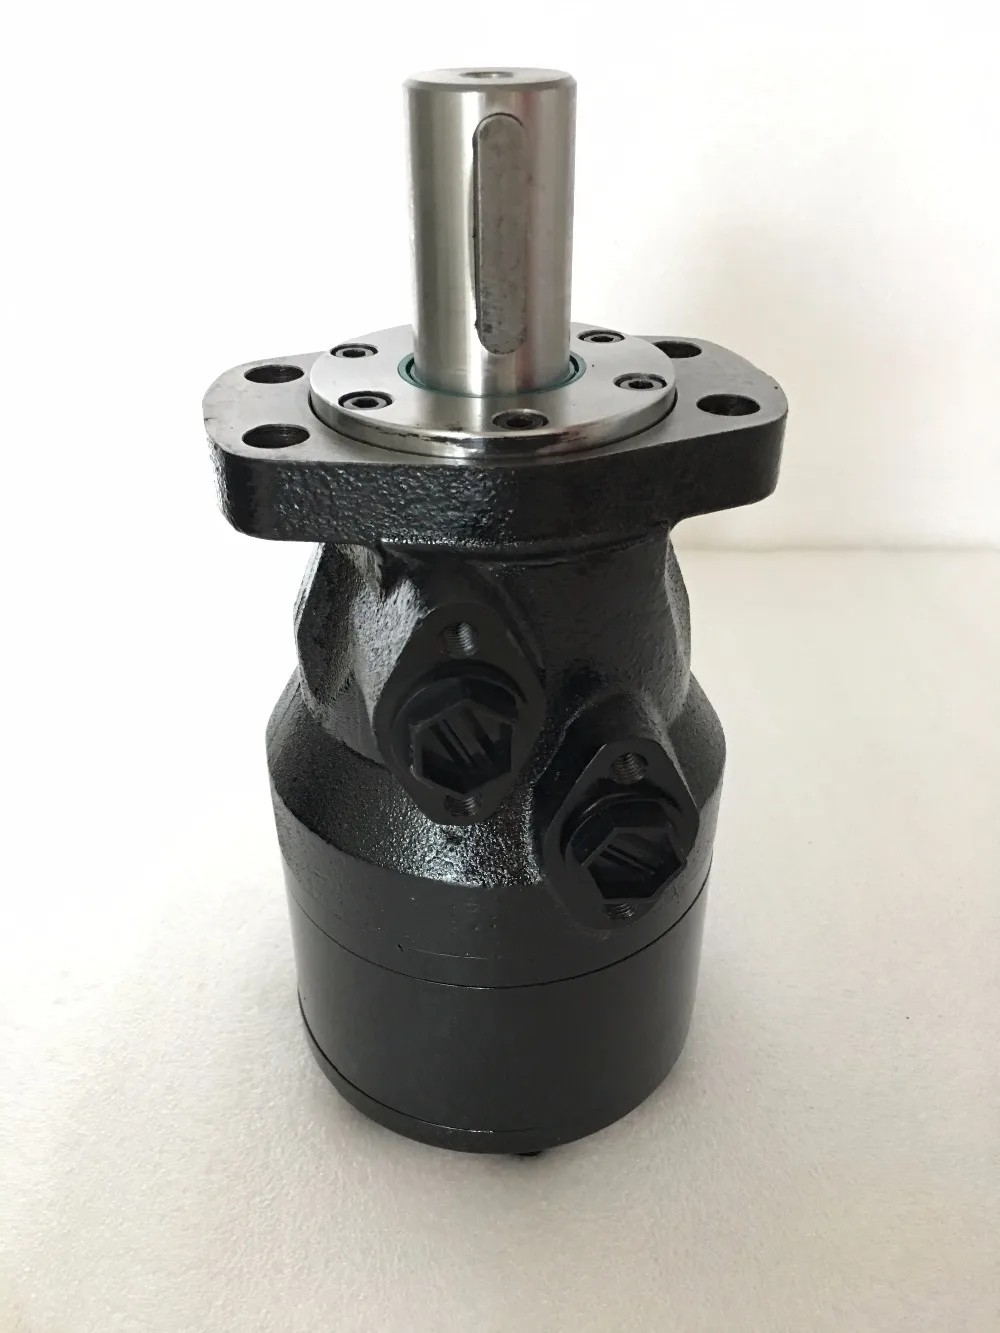 

Crane accessories Low speed and high torque Cycloid hydraulic motor